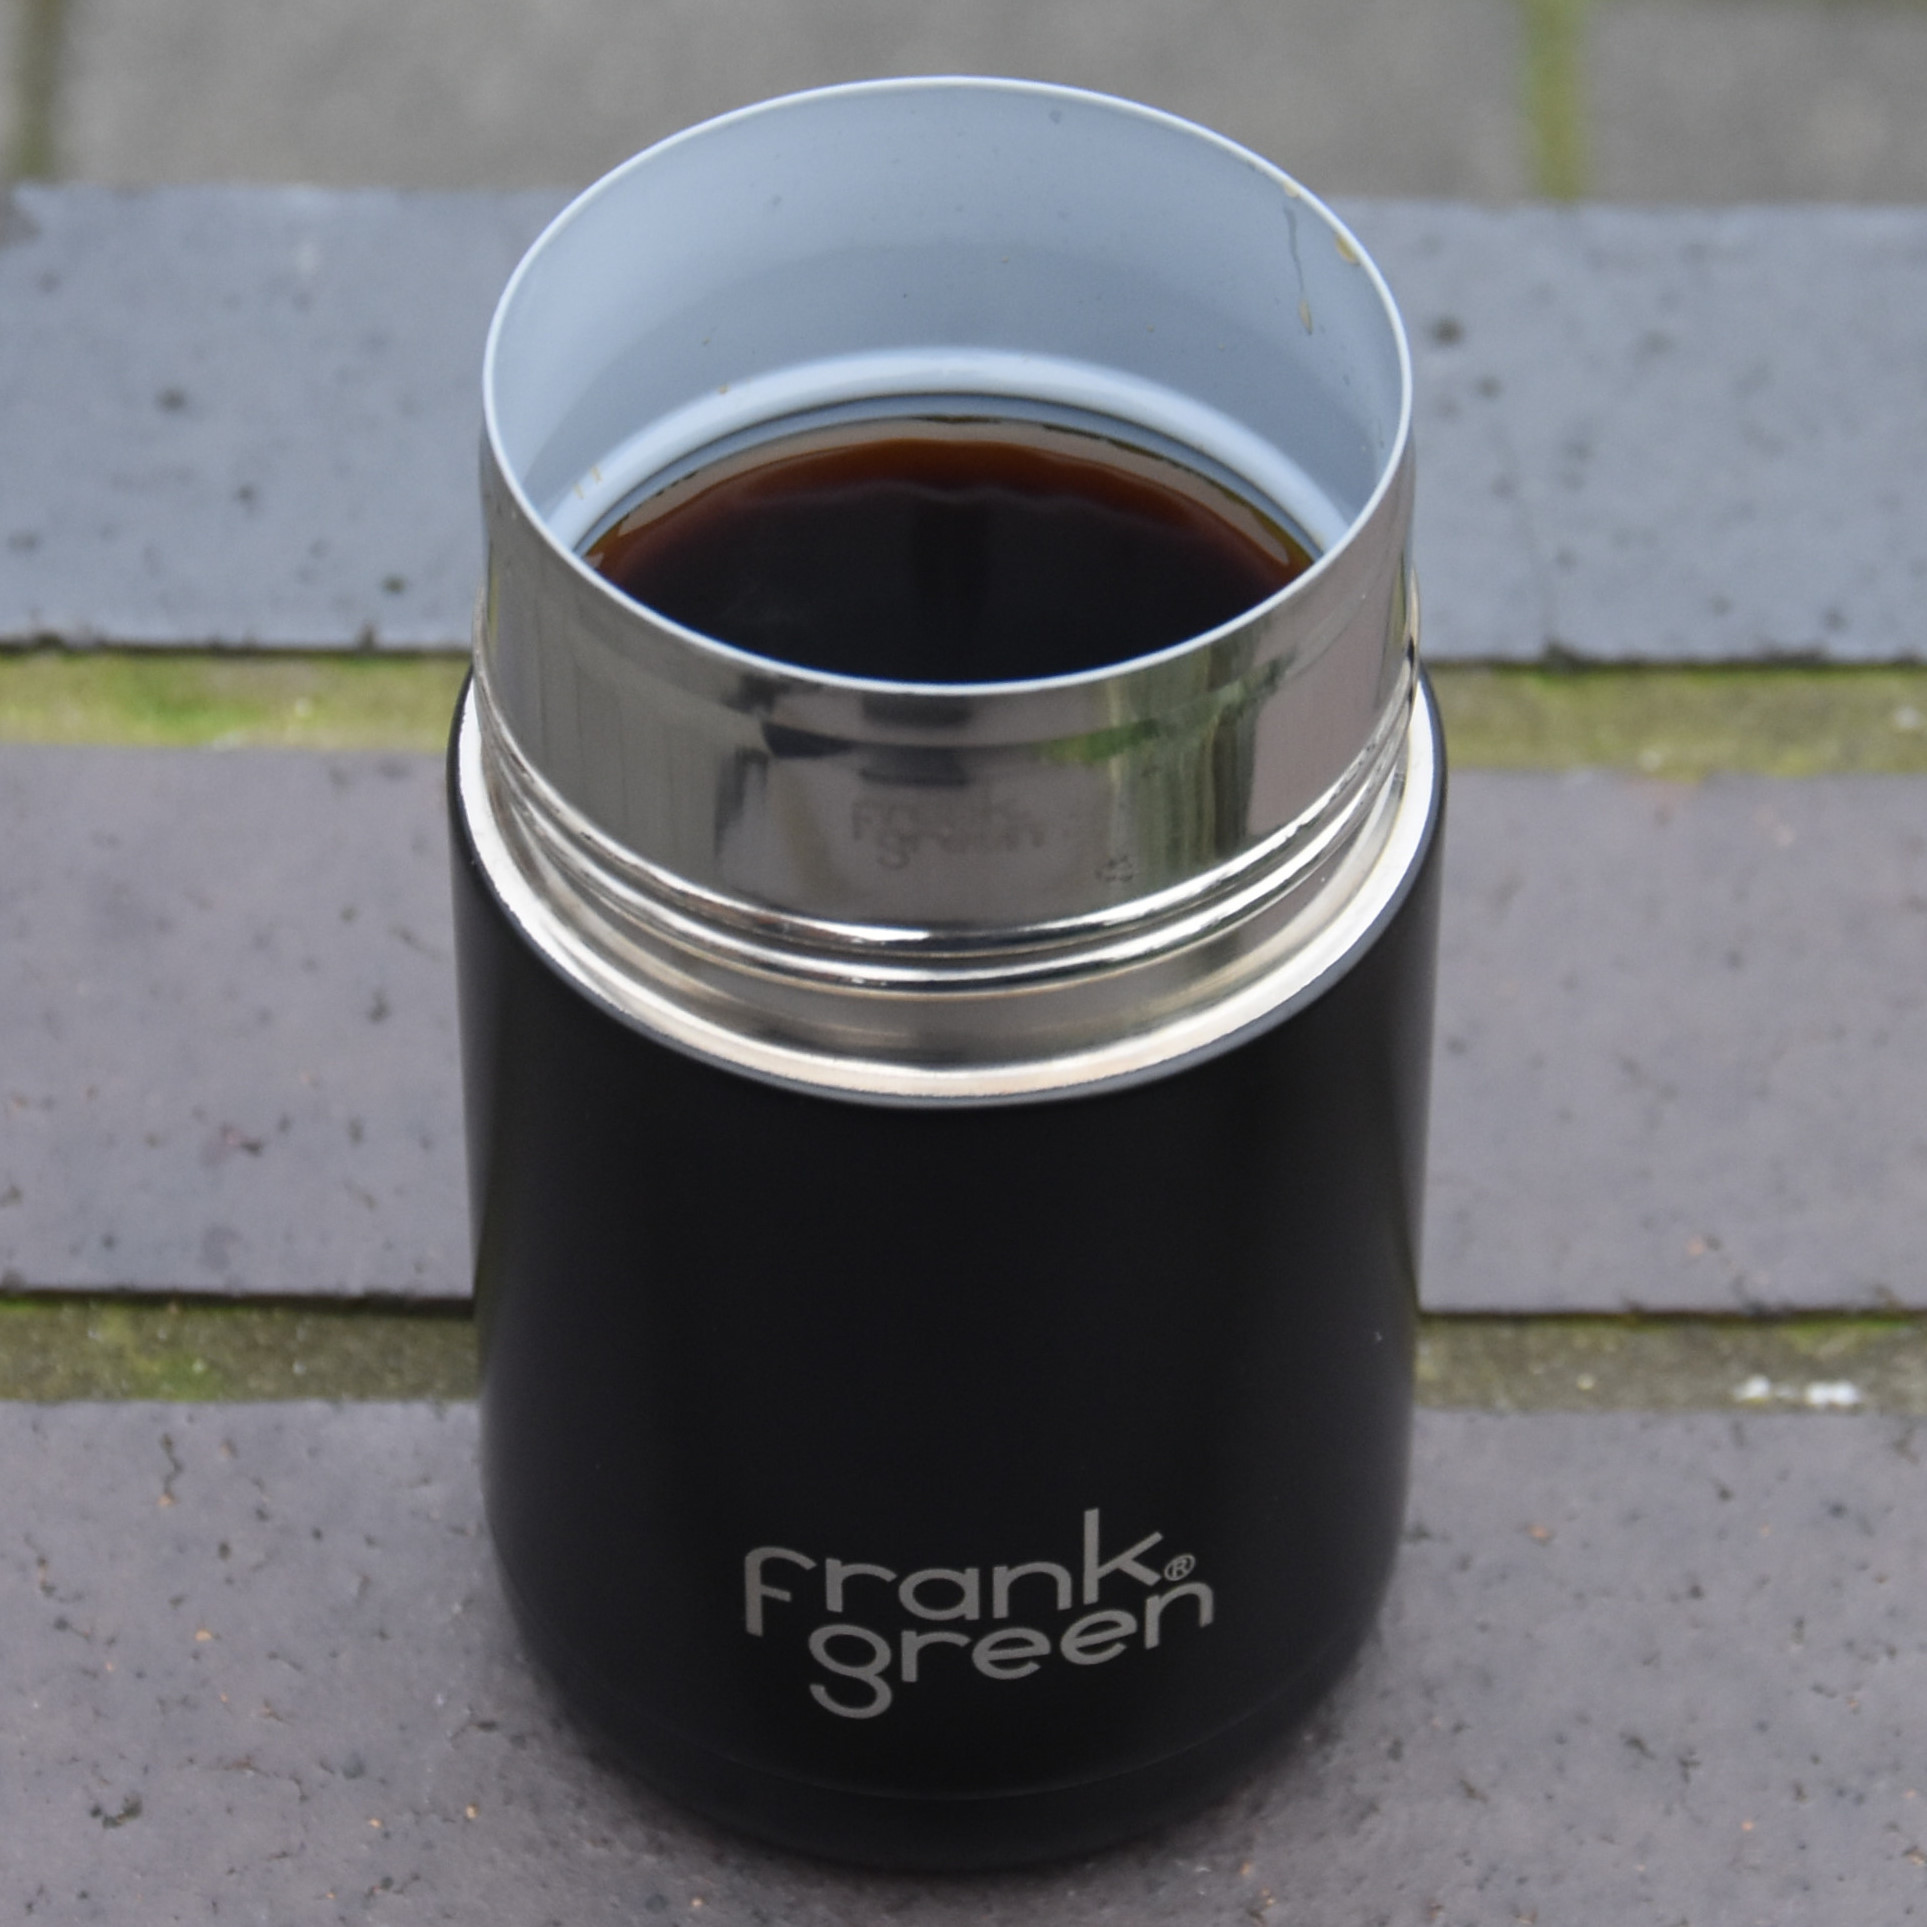 My new (and very stylish) Frank Green ceramic reusable cup in action outside Canopy Coffee in Guildford.